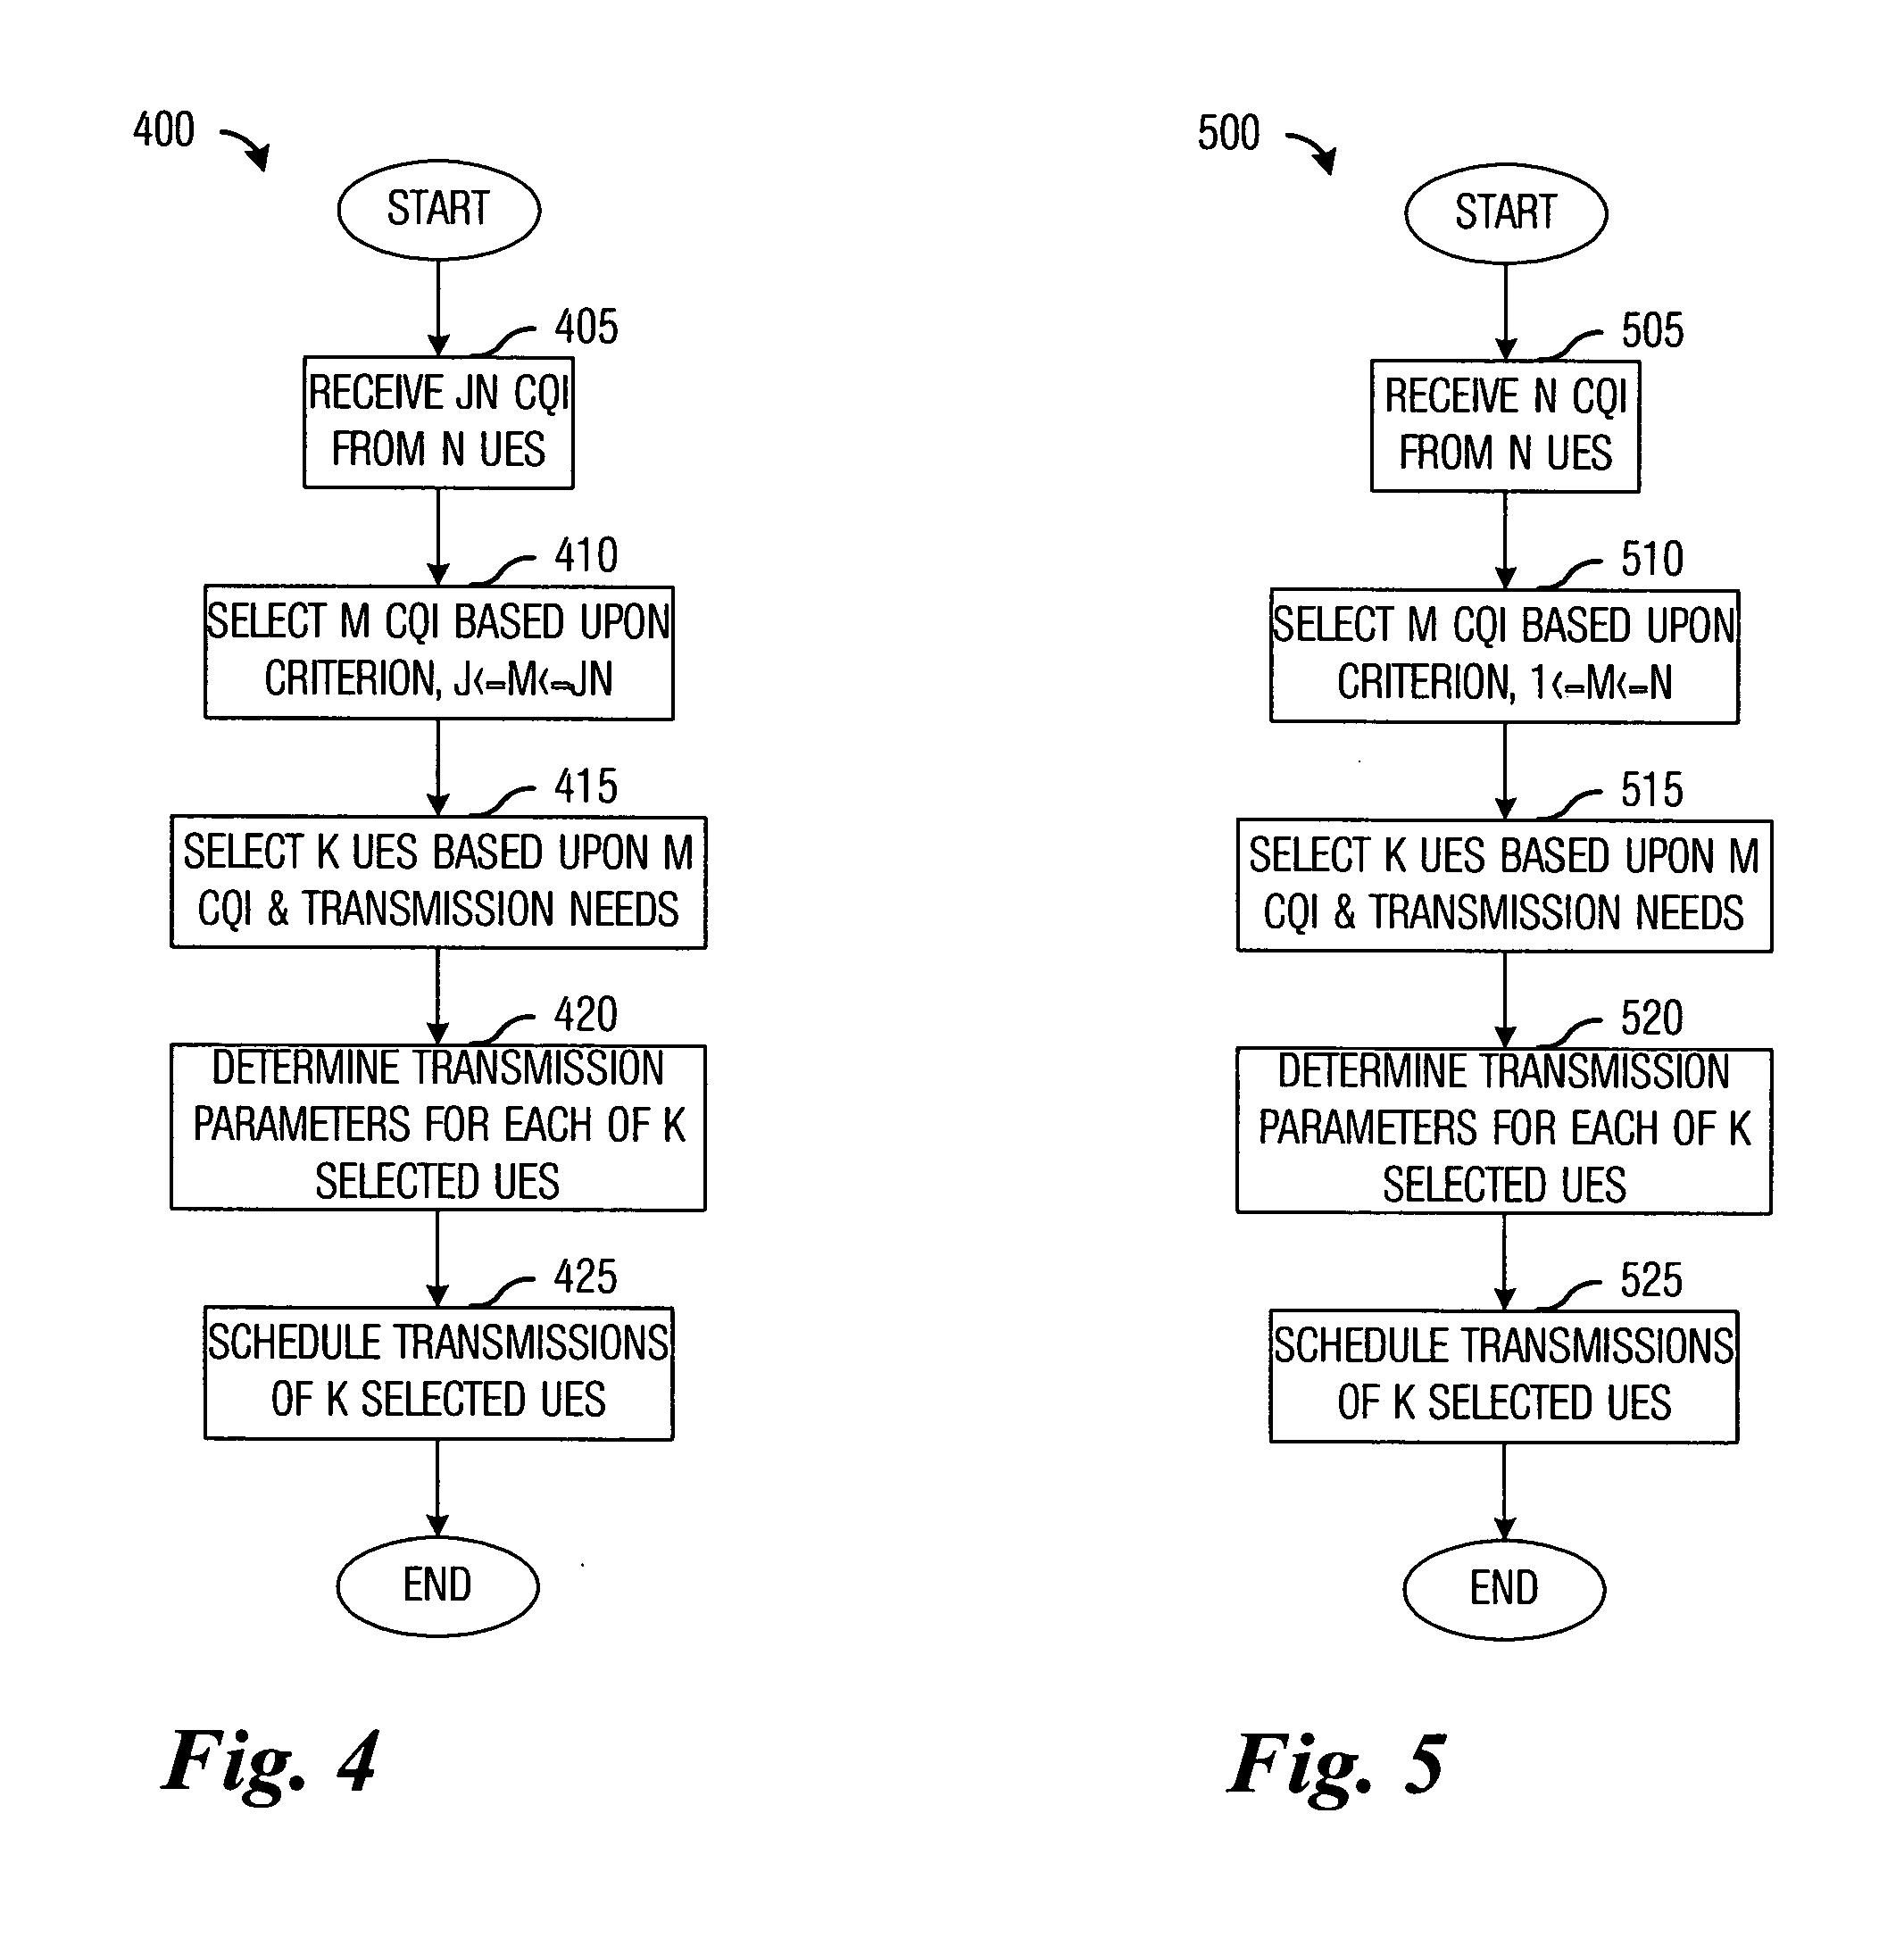 Packet transmission scheduling in a multi-carrier communications system